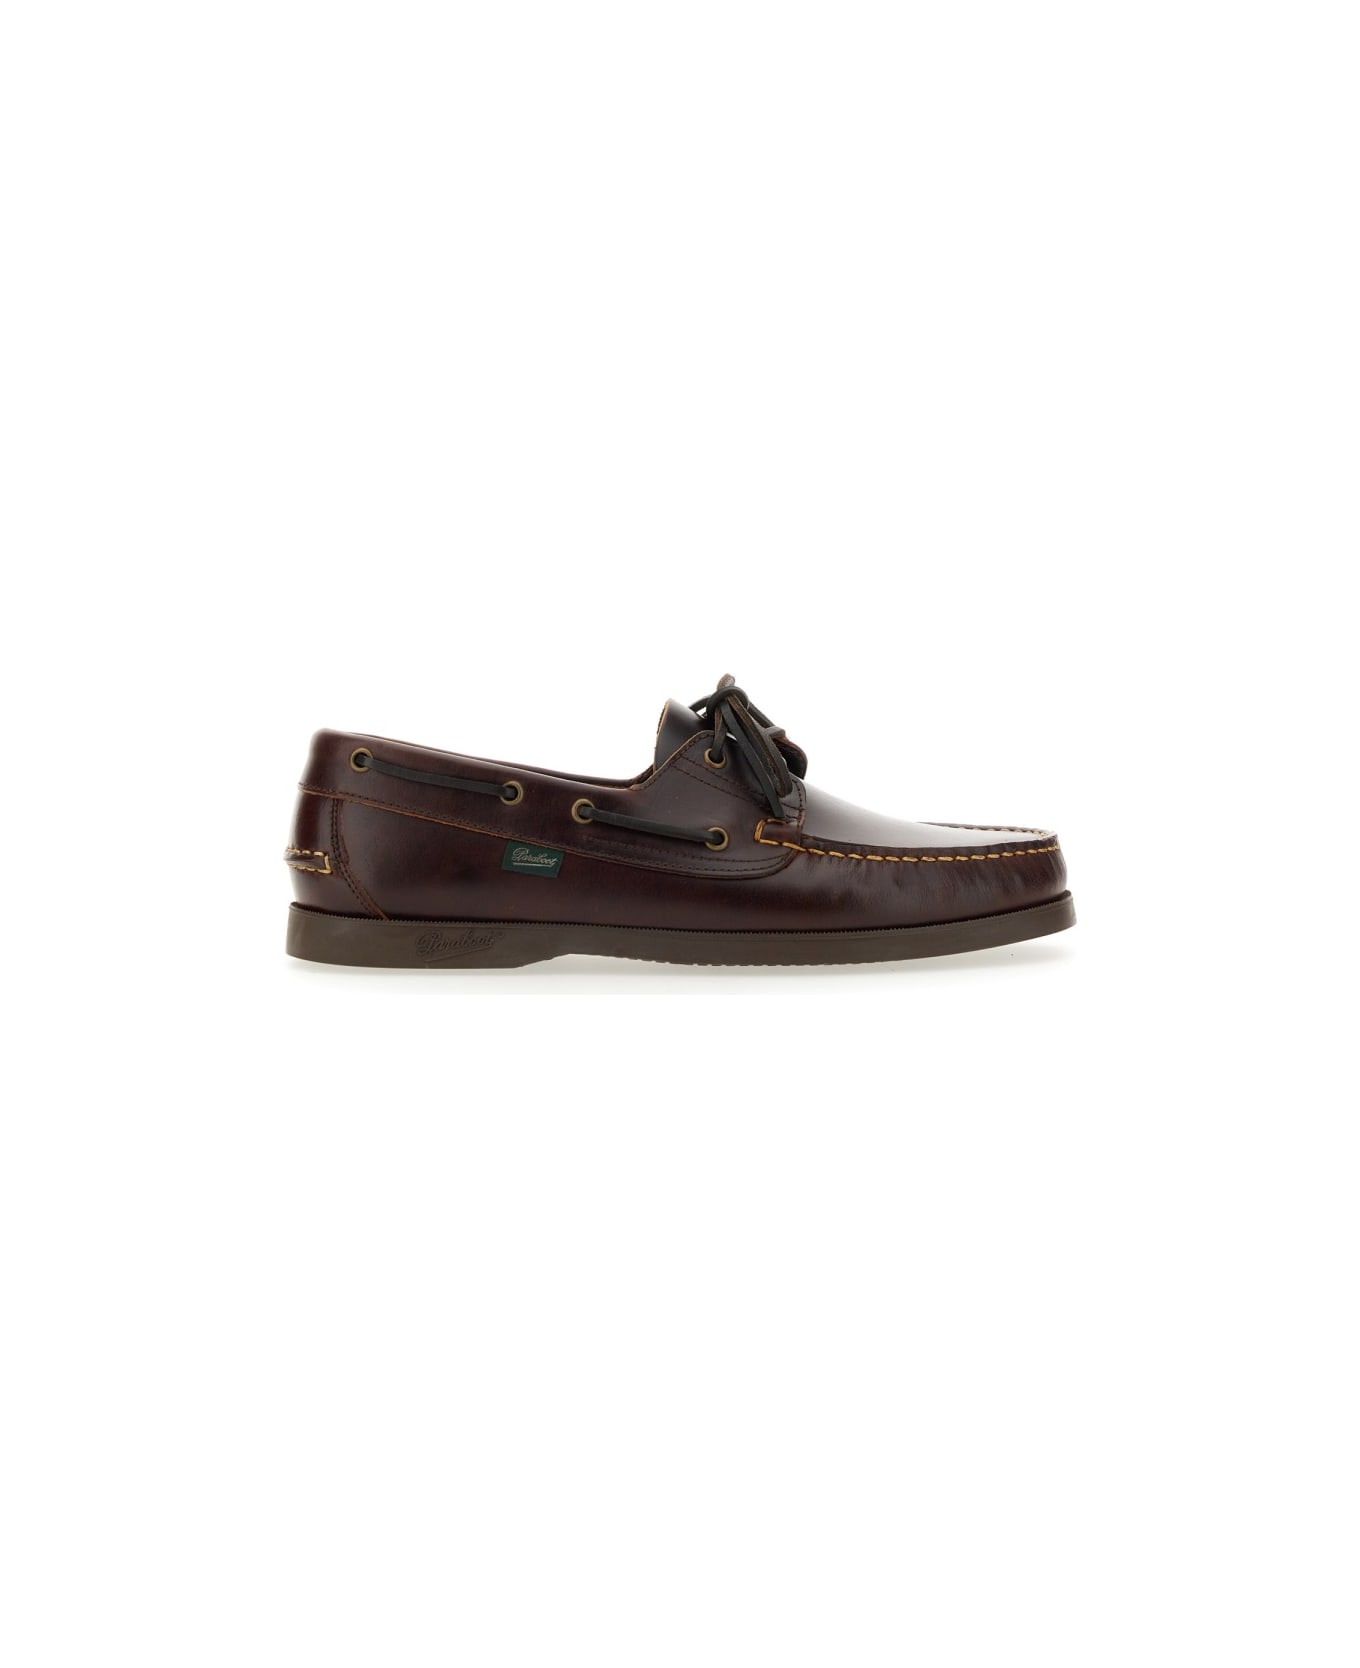 Paraboot Moccasin "barth" - BROWN